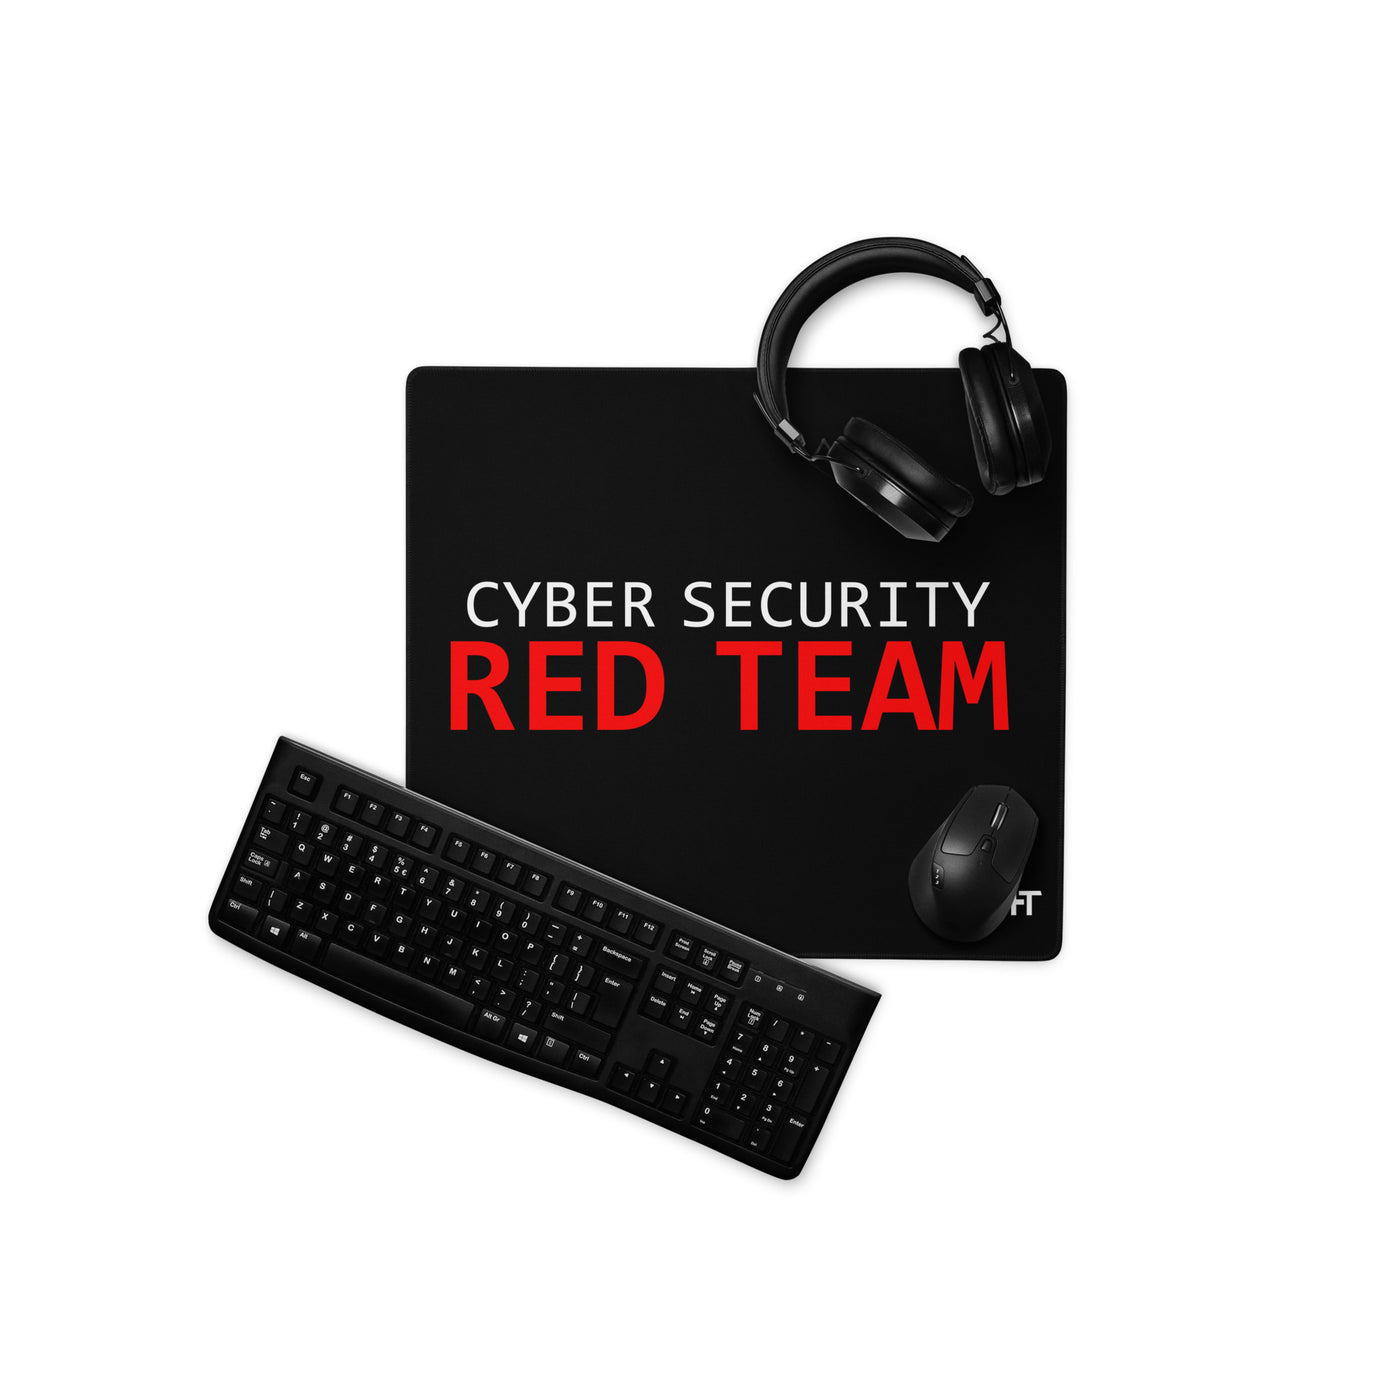 Cyber Security Red Team - Gaming mouse pad